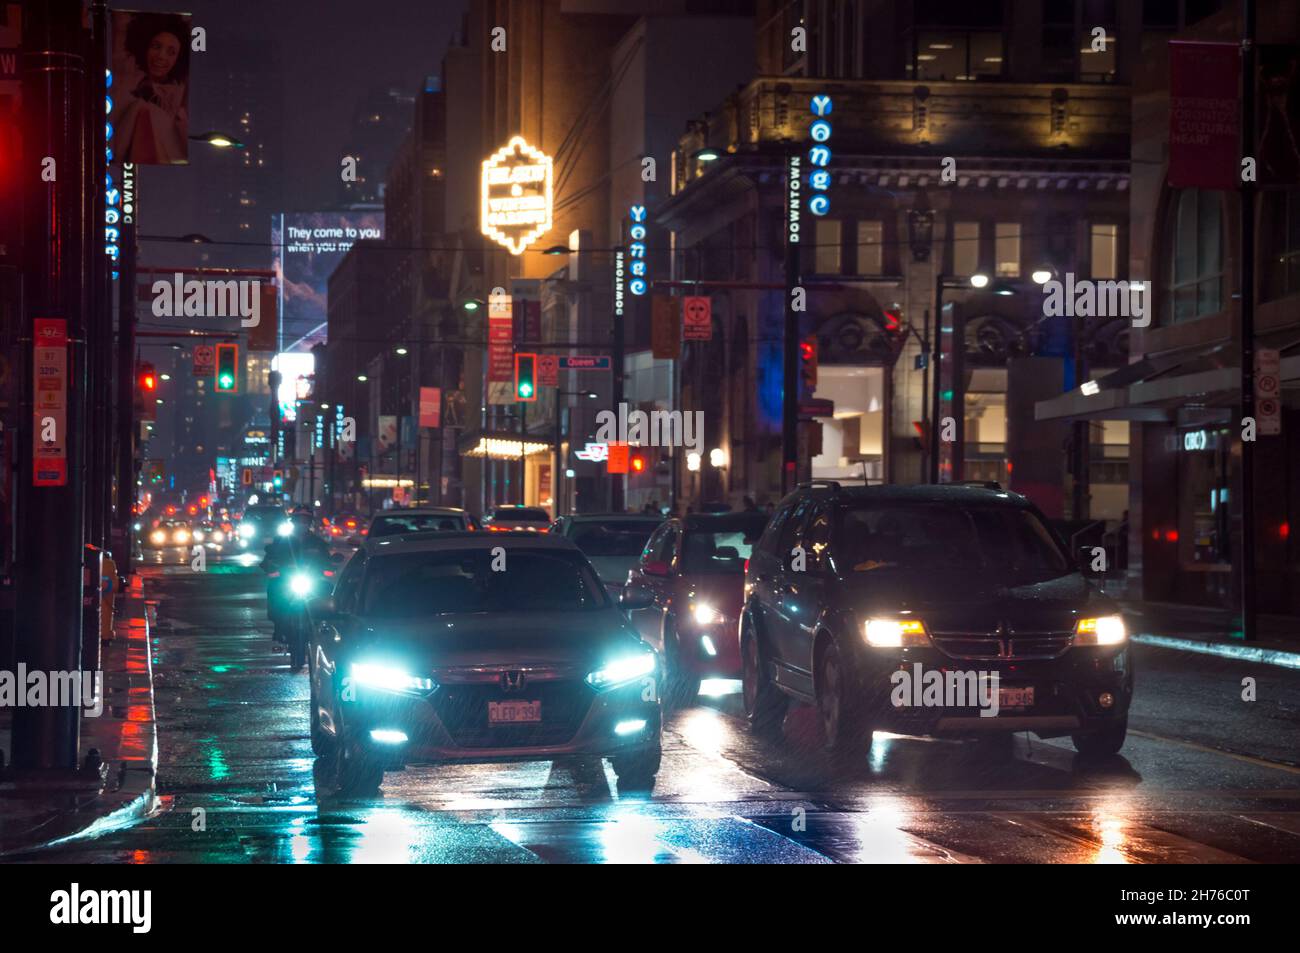 Toronto, Canada - 10 30 2021: Night rain pouring down on cars standing on traffic lights in Yonge street in downtown Toronto with bright colorful str Stock Photo